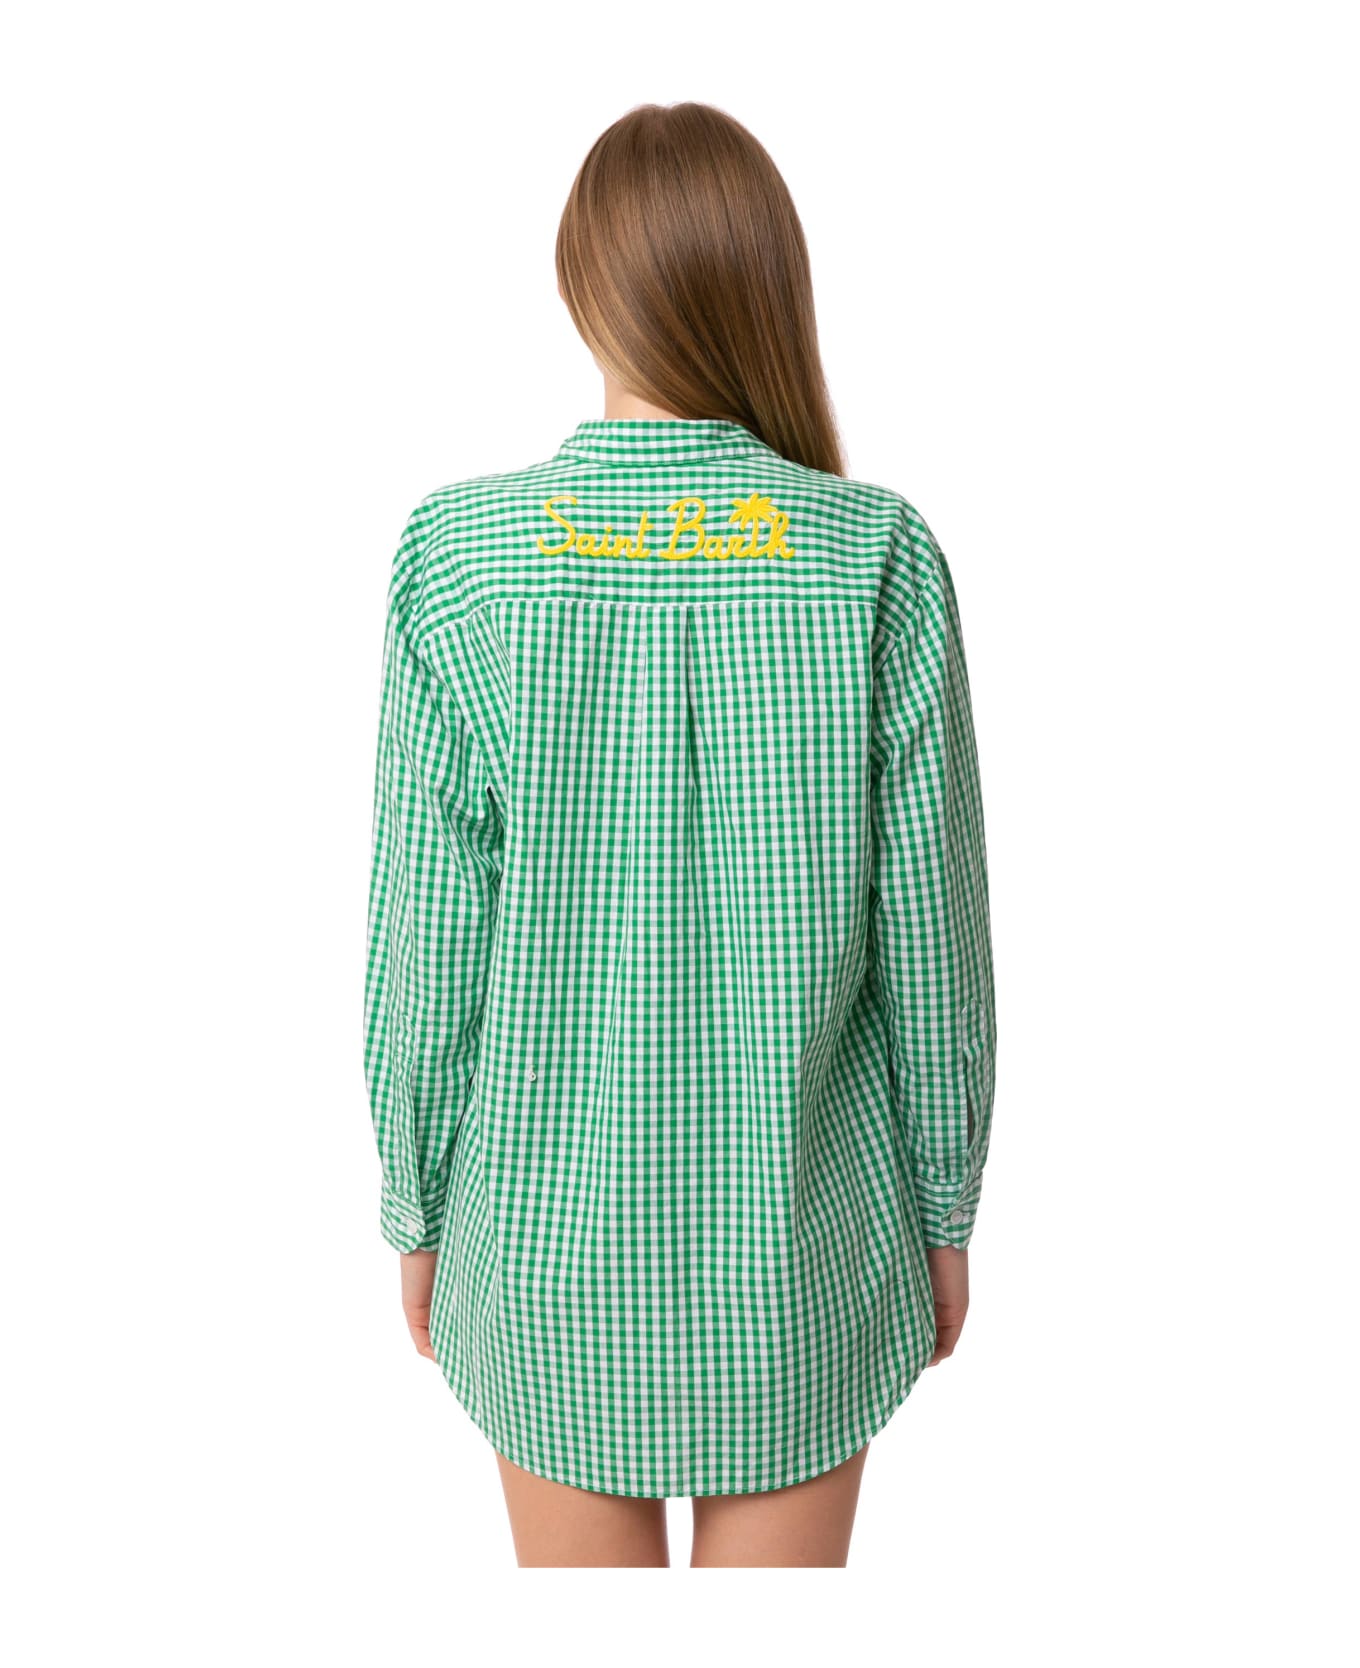 MC2 Saint Barth Green Gingham Cotton Shirt With Embroidery - GREEN